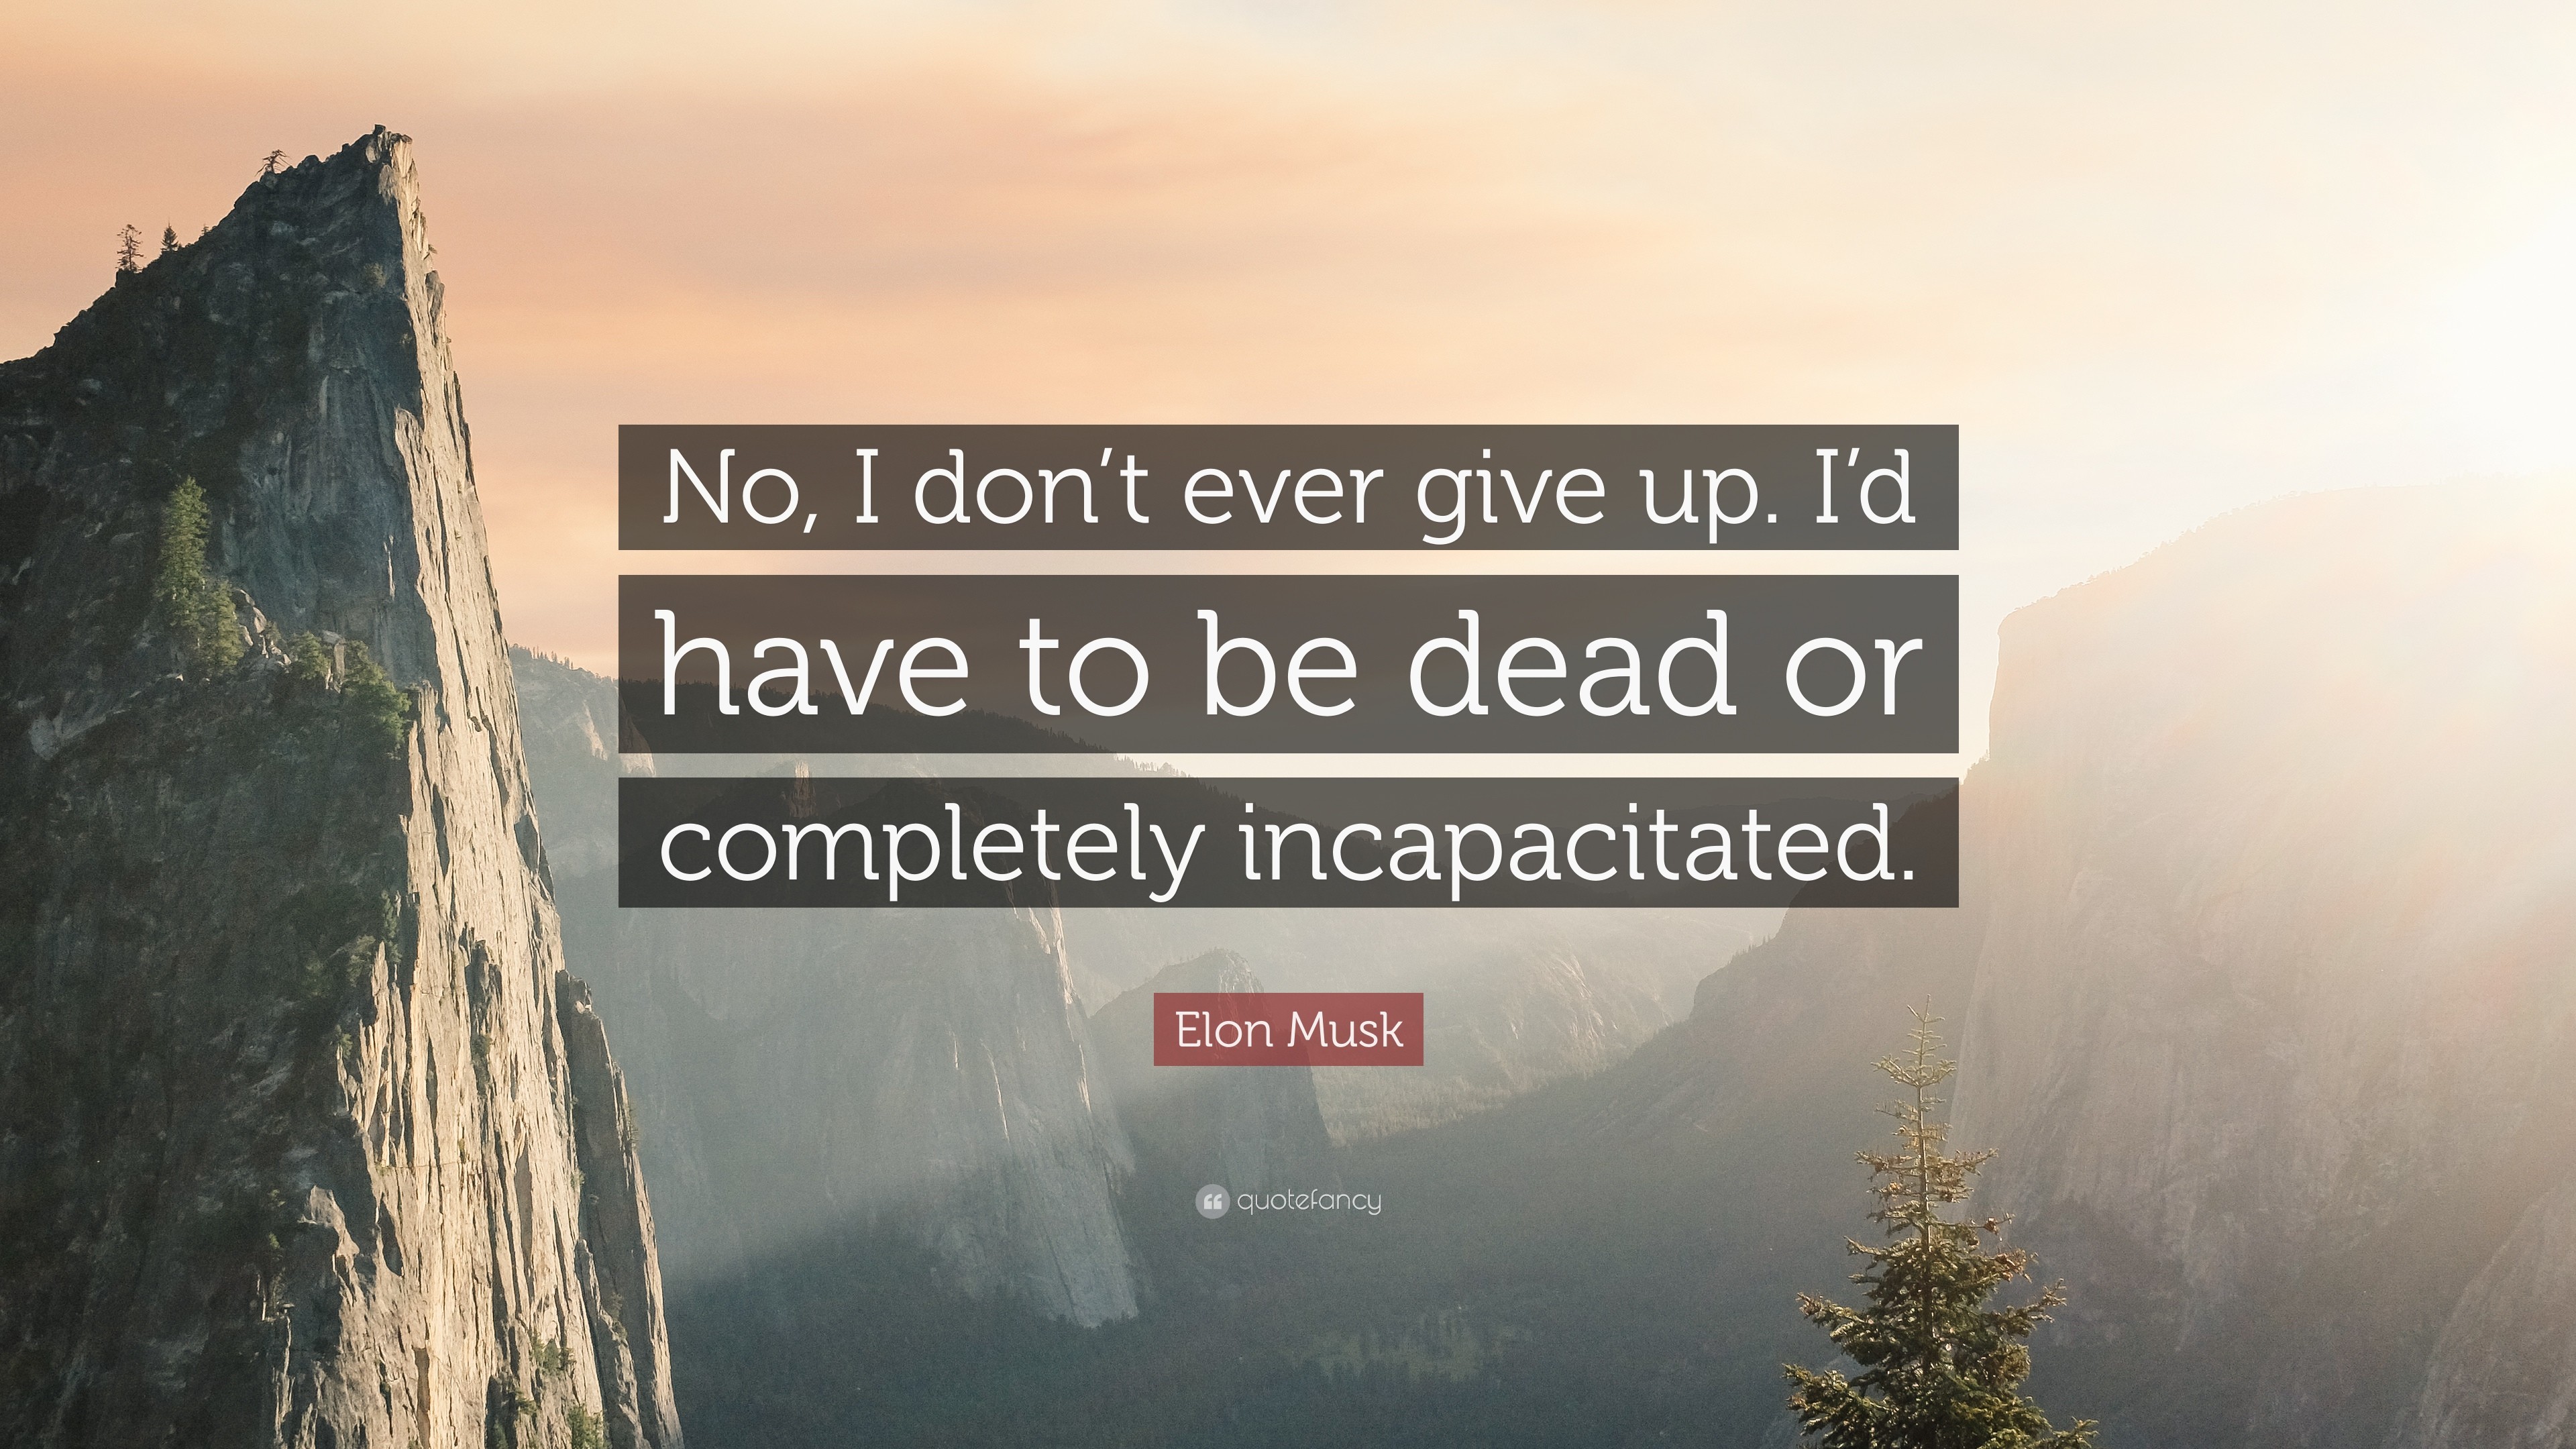 3840x2160 Elon Musk Quote: “No, I don't ever give up. I